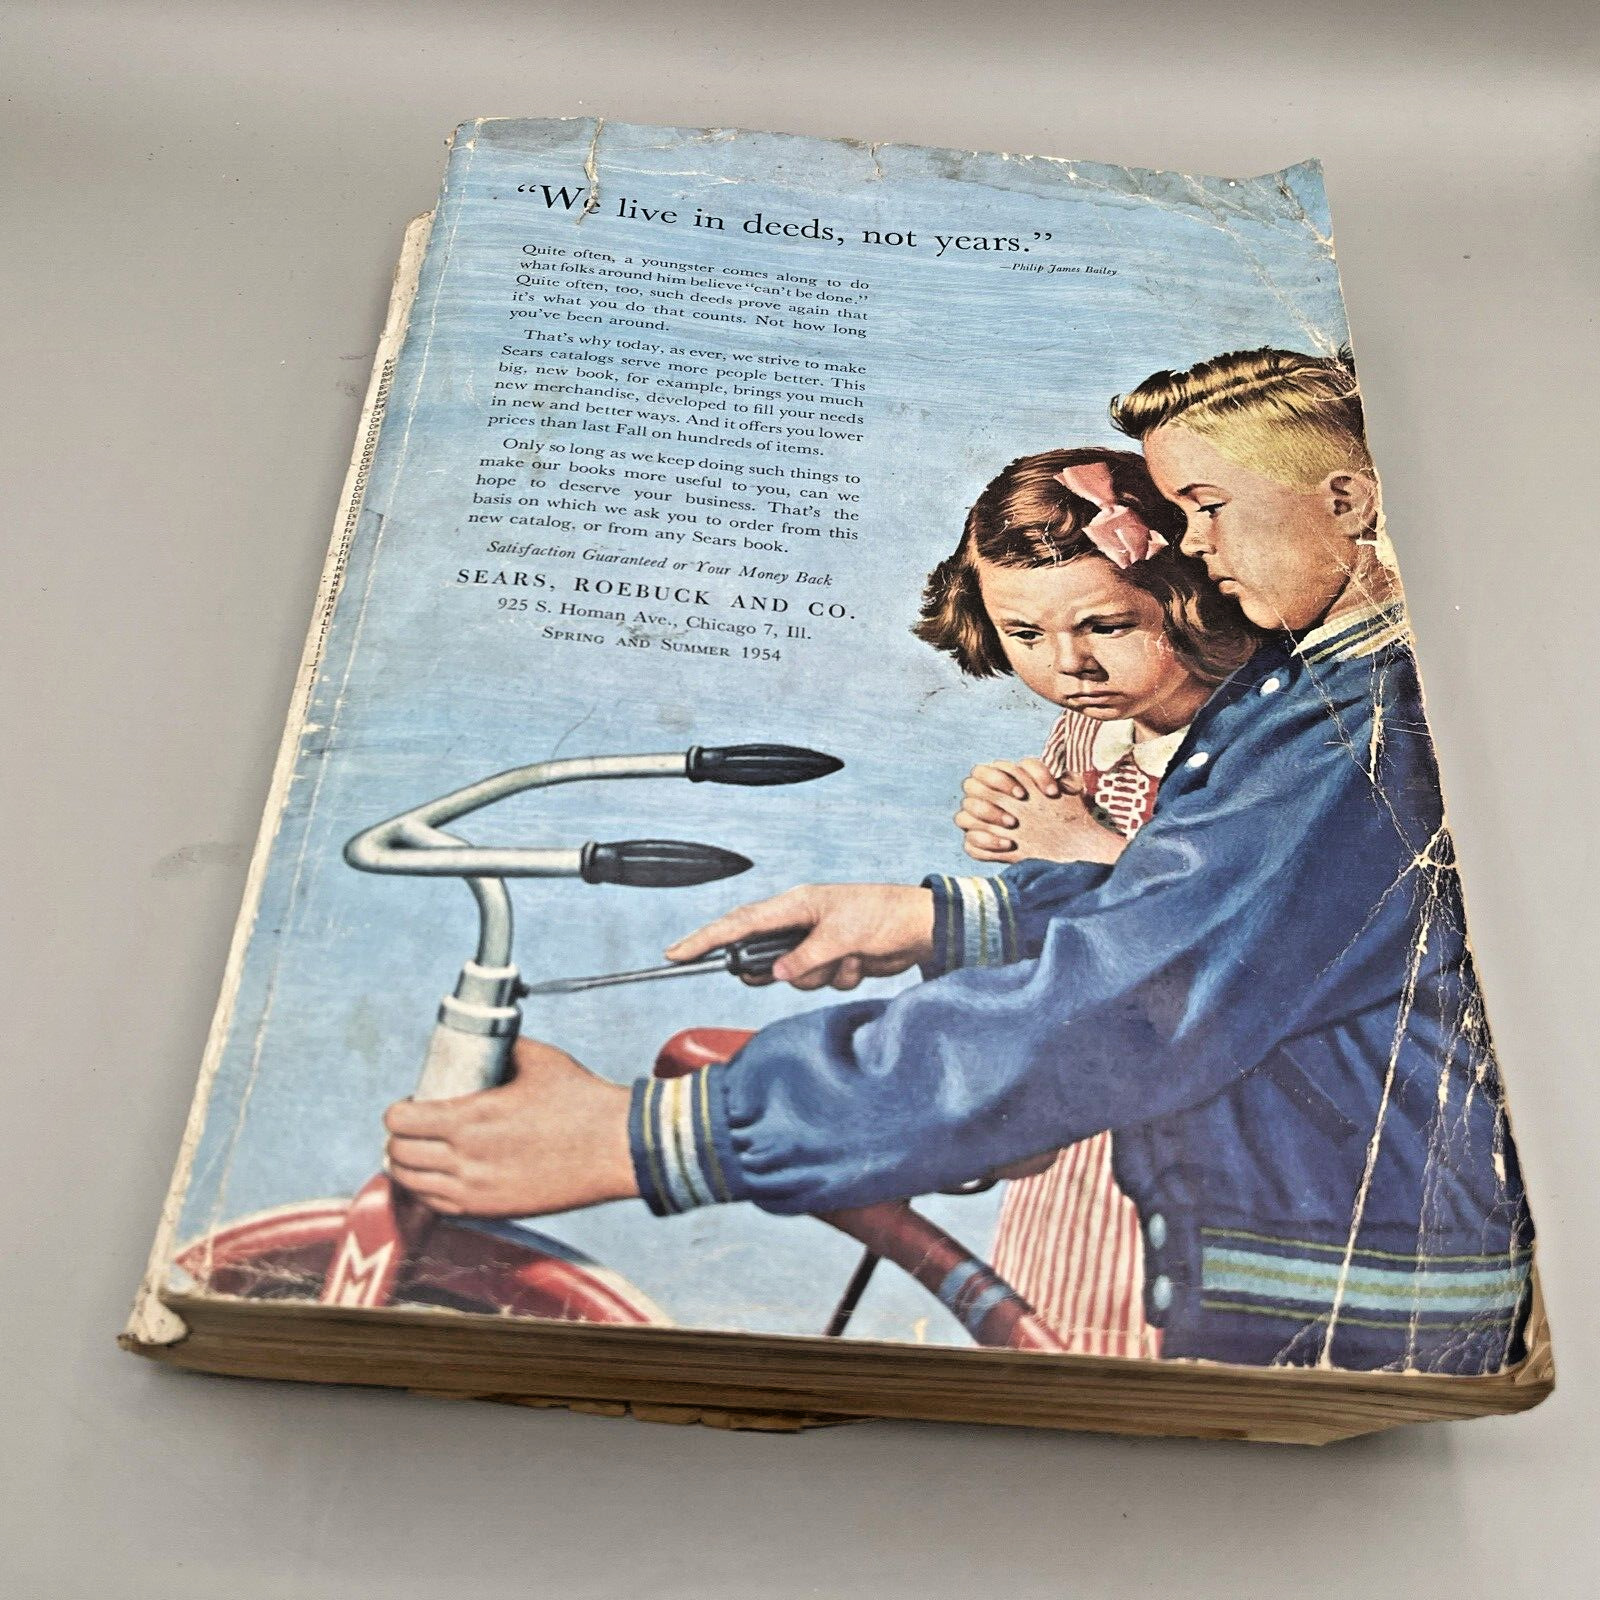 1954 Sears Roebuck Co. Spring/Summer 1298+ pages Sales Catalog